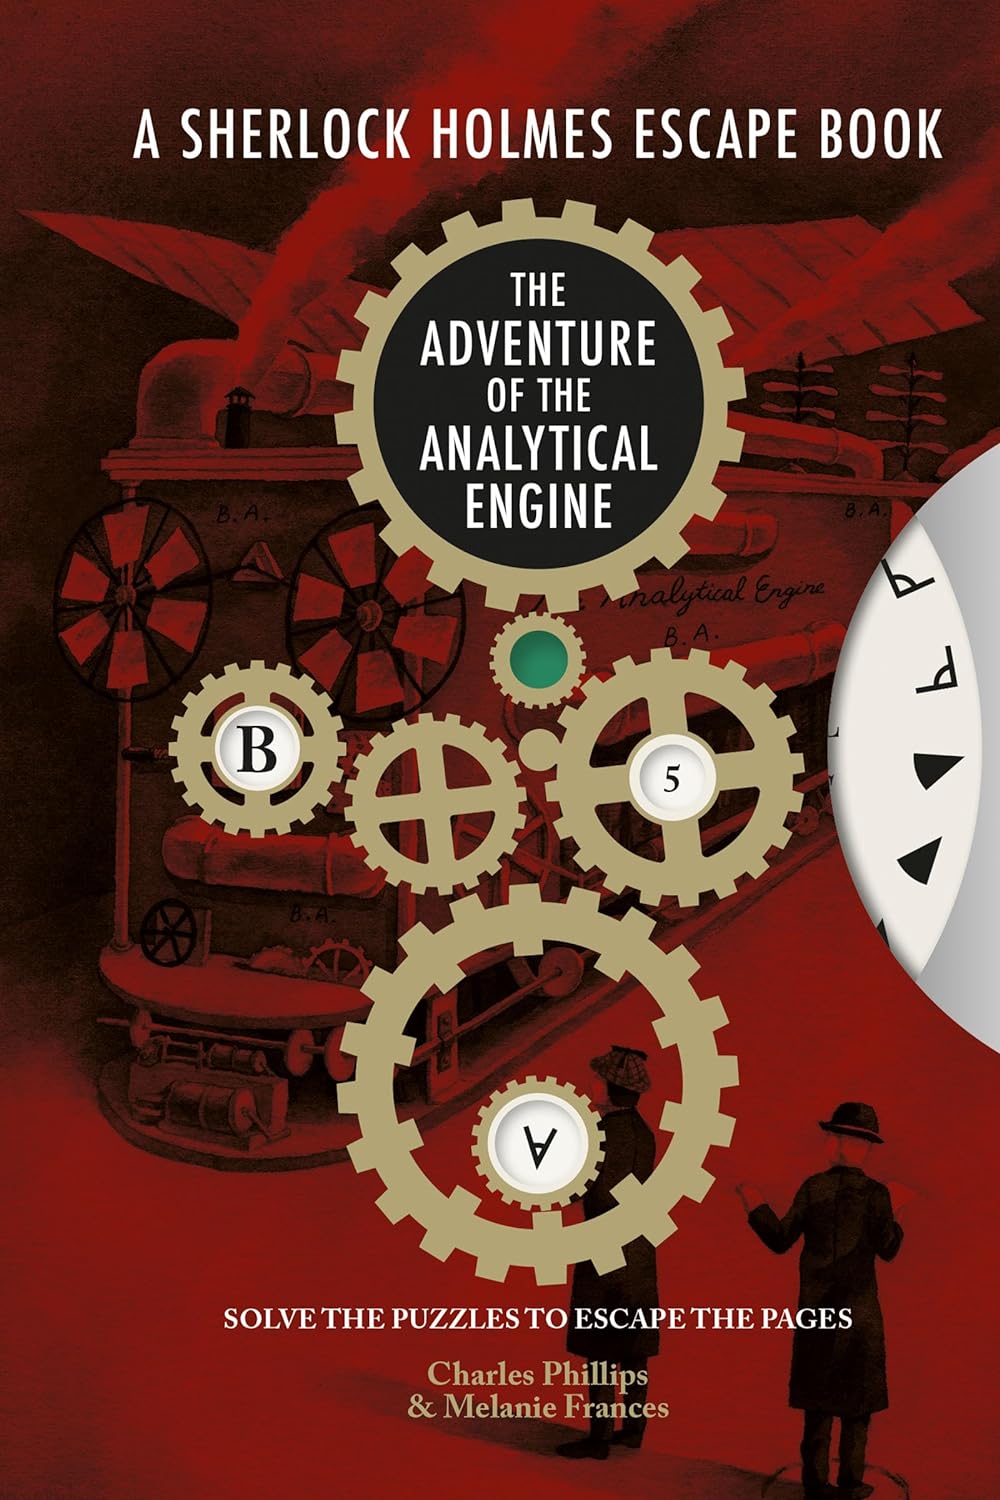 Sherlock Holmes Escape Book - Adventure of the Analytical Engine